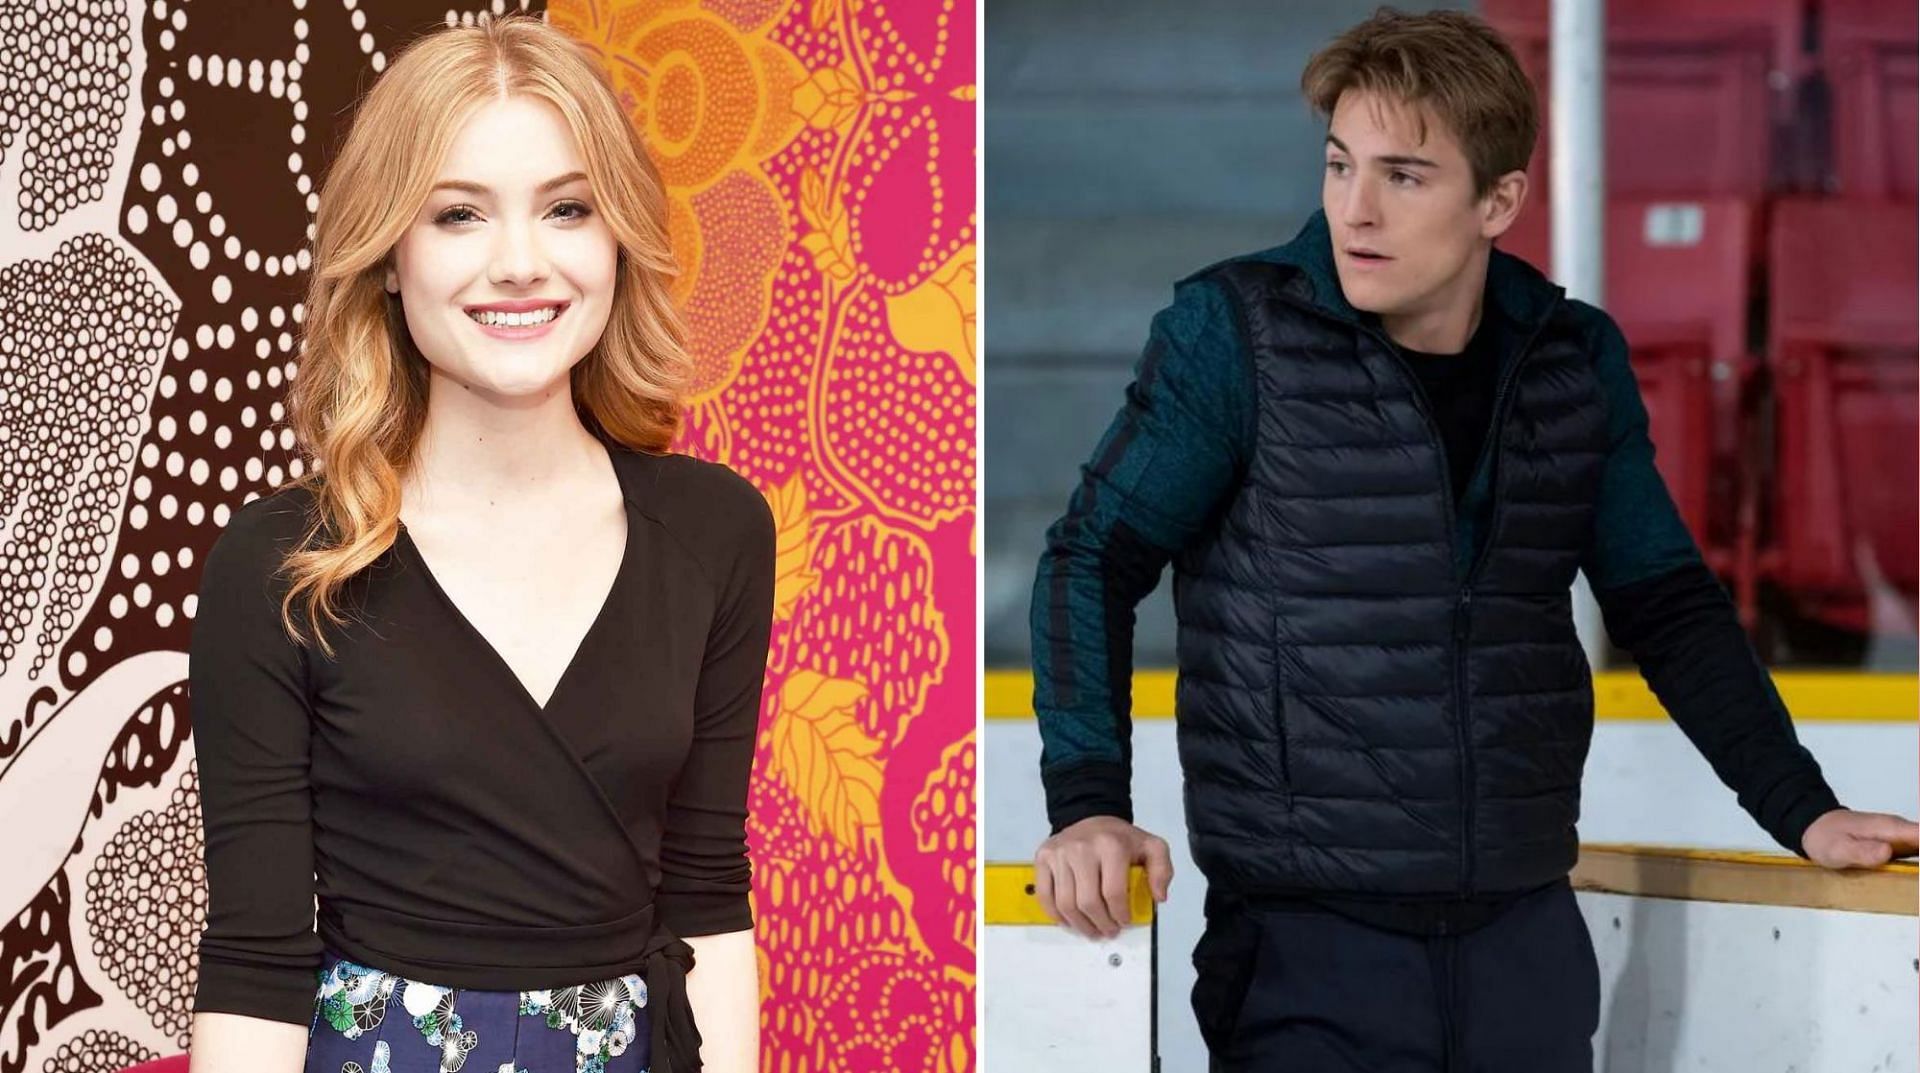 Skyler Samuels and Evan Roderick play Aurora and Arthur in Aurora Teagarden Mysteries: Something New (Images via Getty/ Everett Collection)